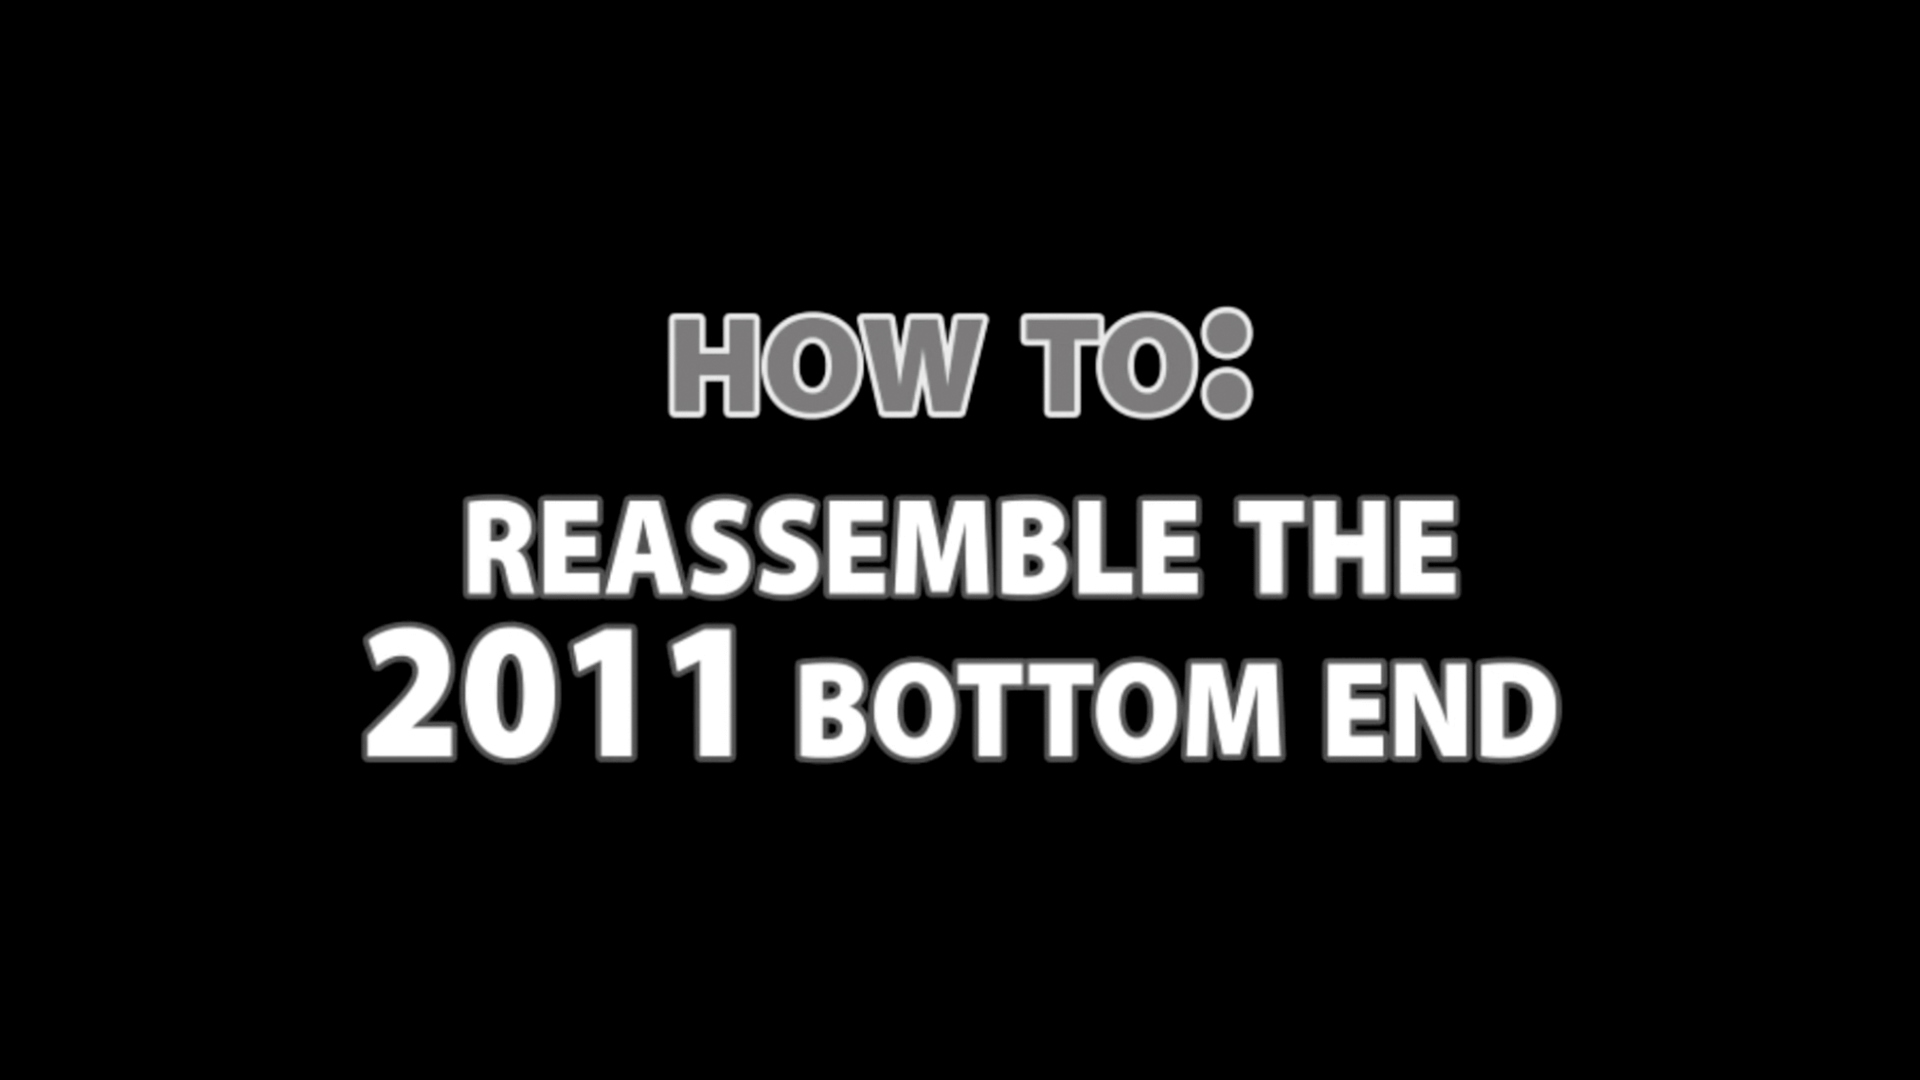 How to: Reassemble a 2011 Bottom End